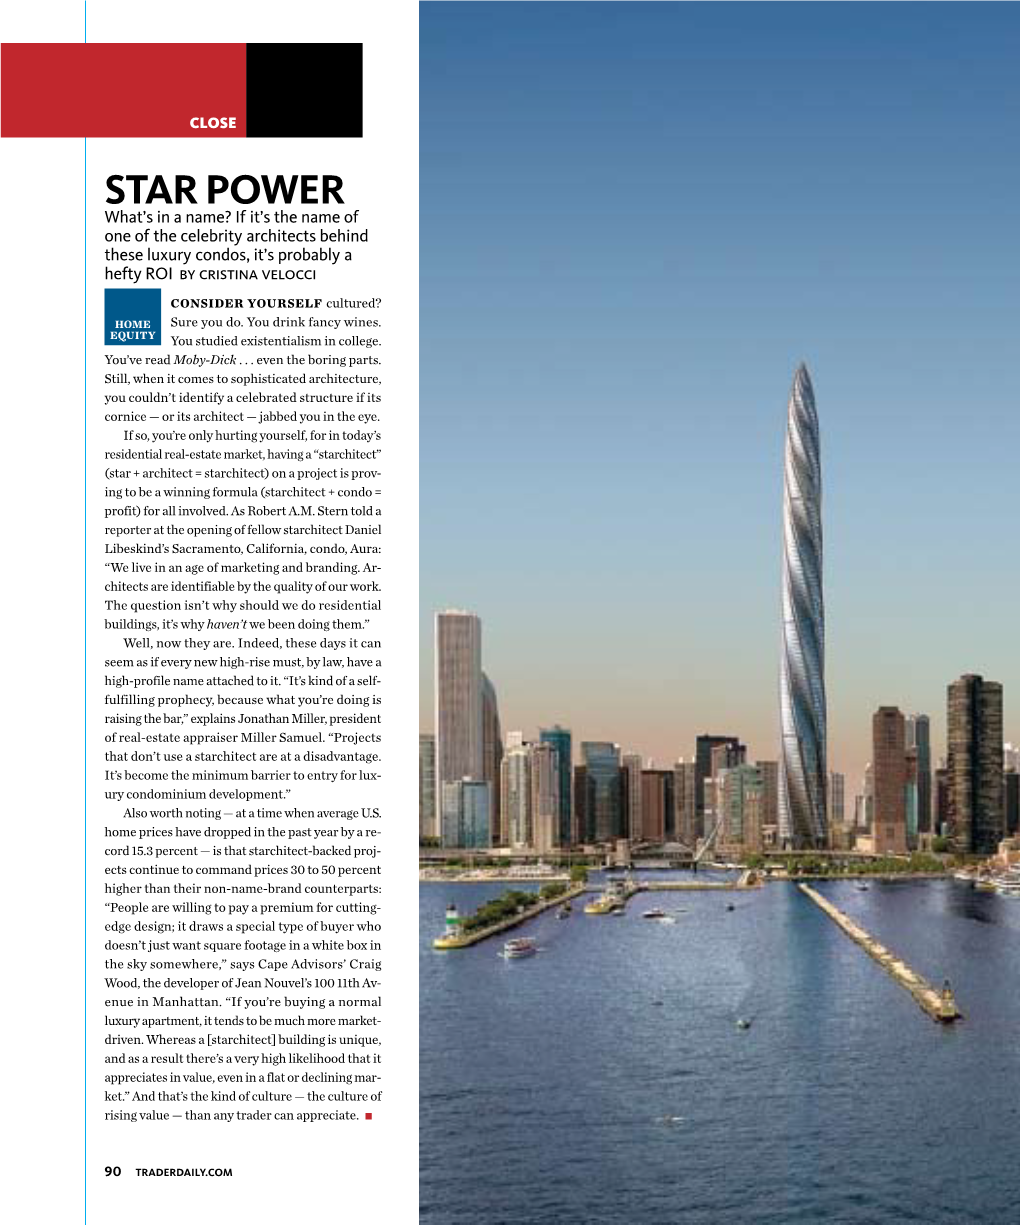 Star Power What’S in a Name? If It’S the Name of One of the Celebrity Architects Behind These Luxury Condos, It’S Probably a Hefty ROI by Cristina Velocci